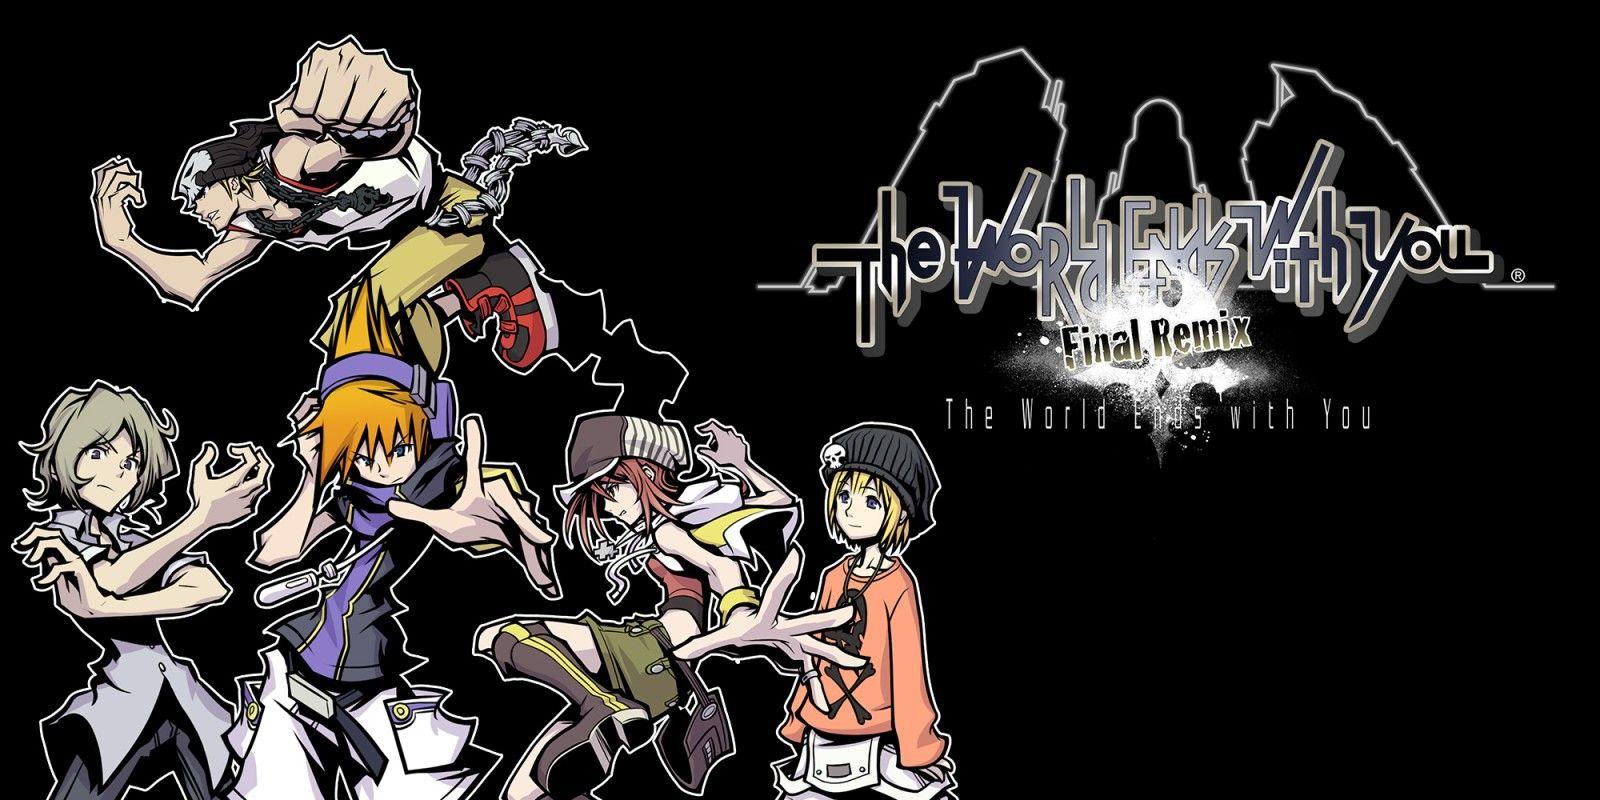 Tetsuya Nomura hints they need sales for a The World Ends With You